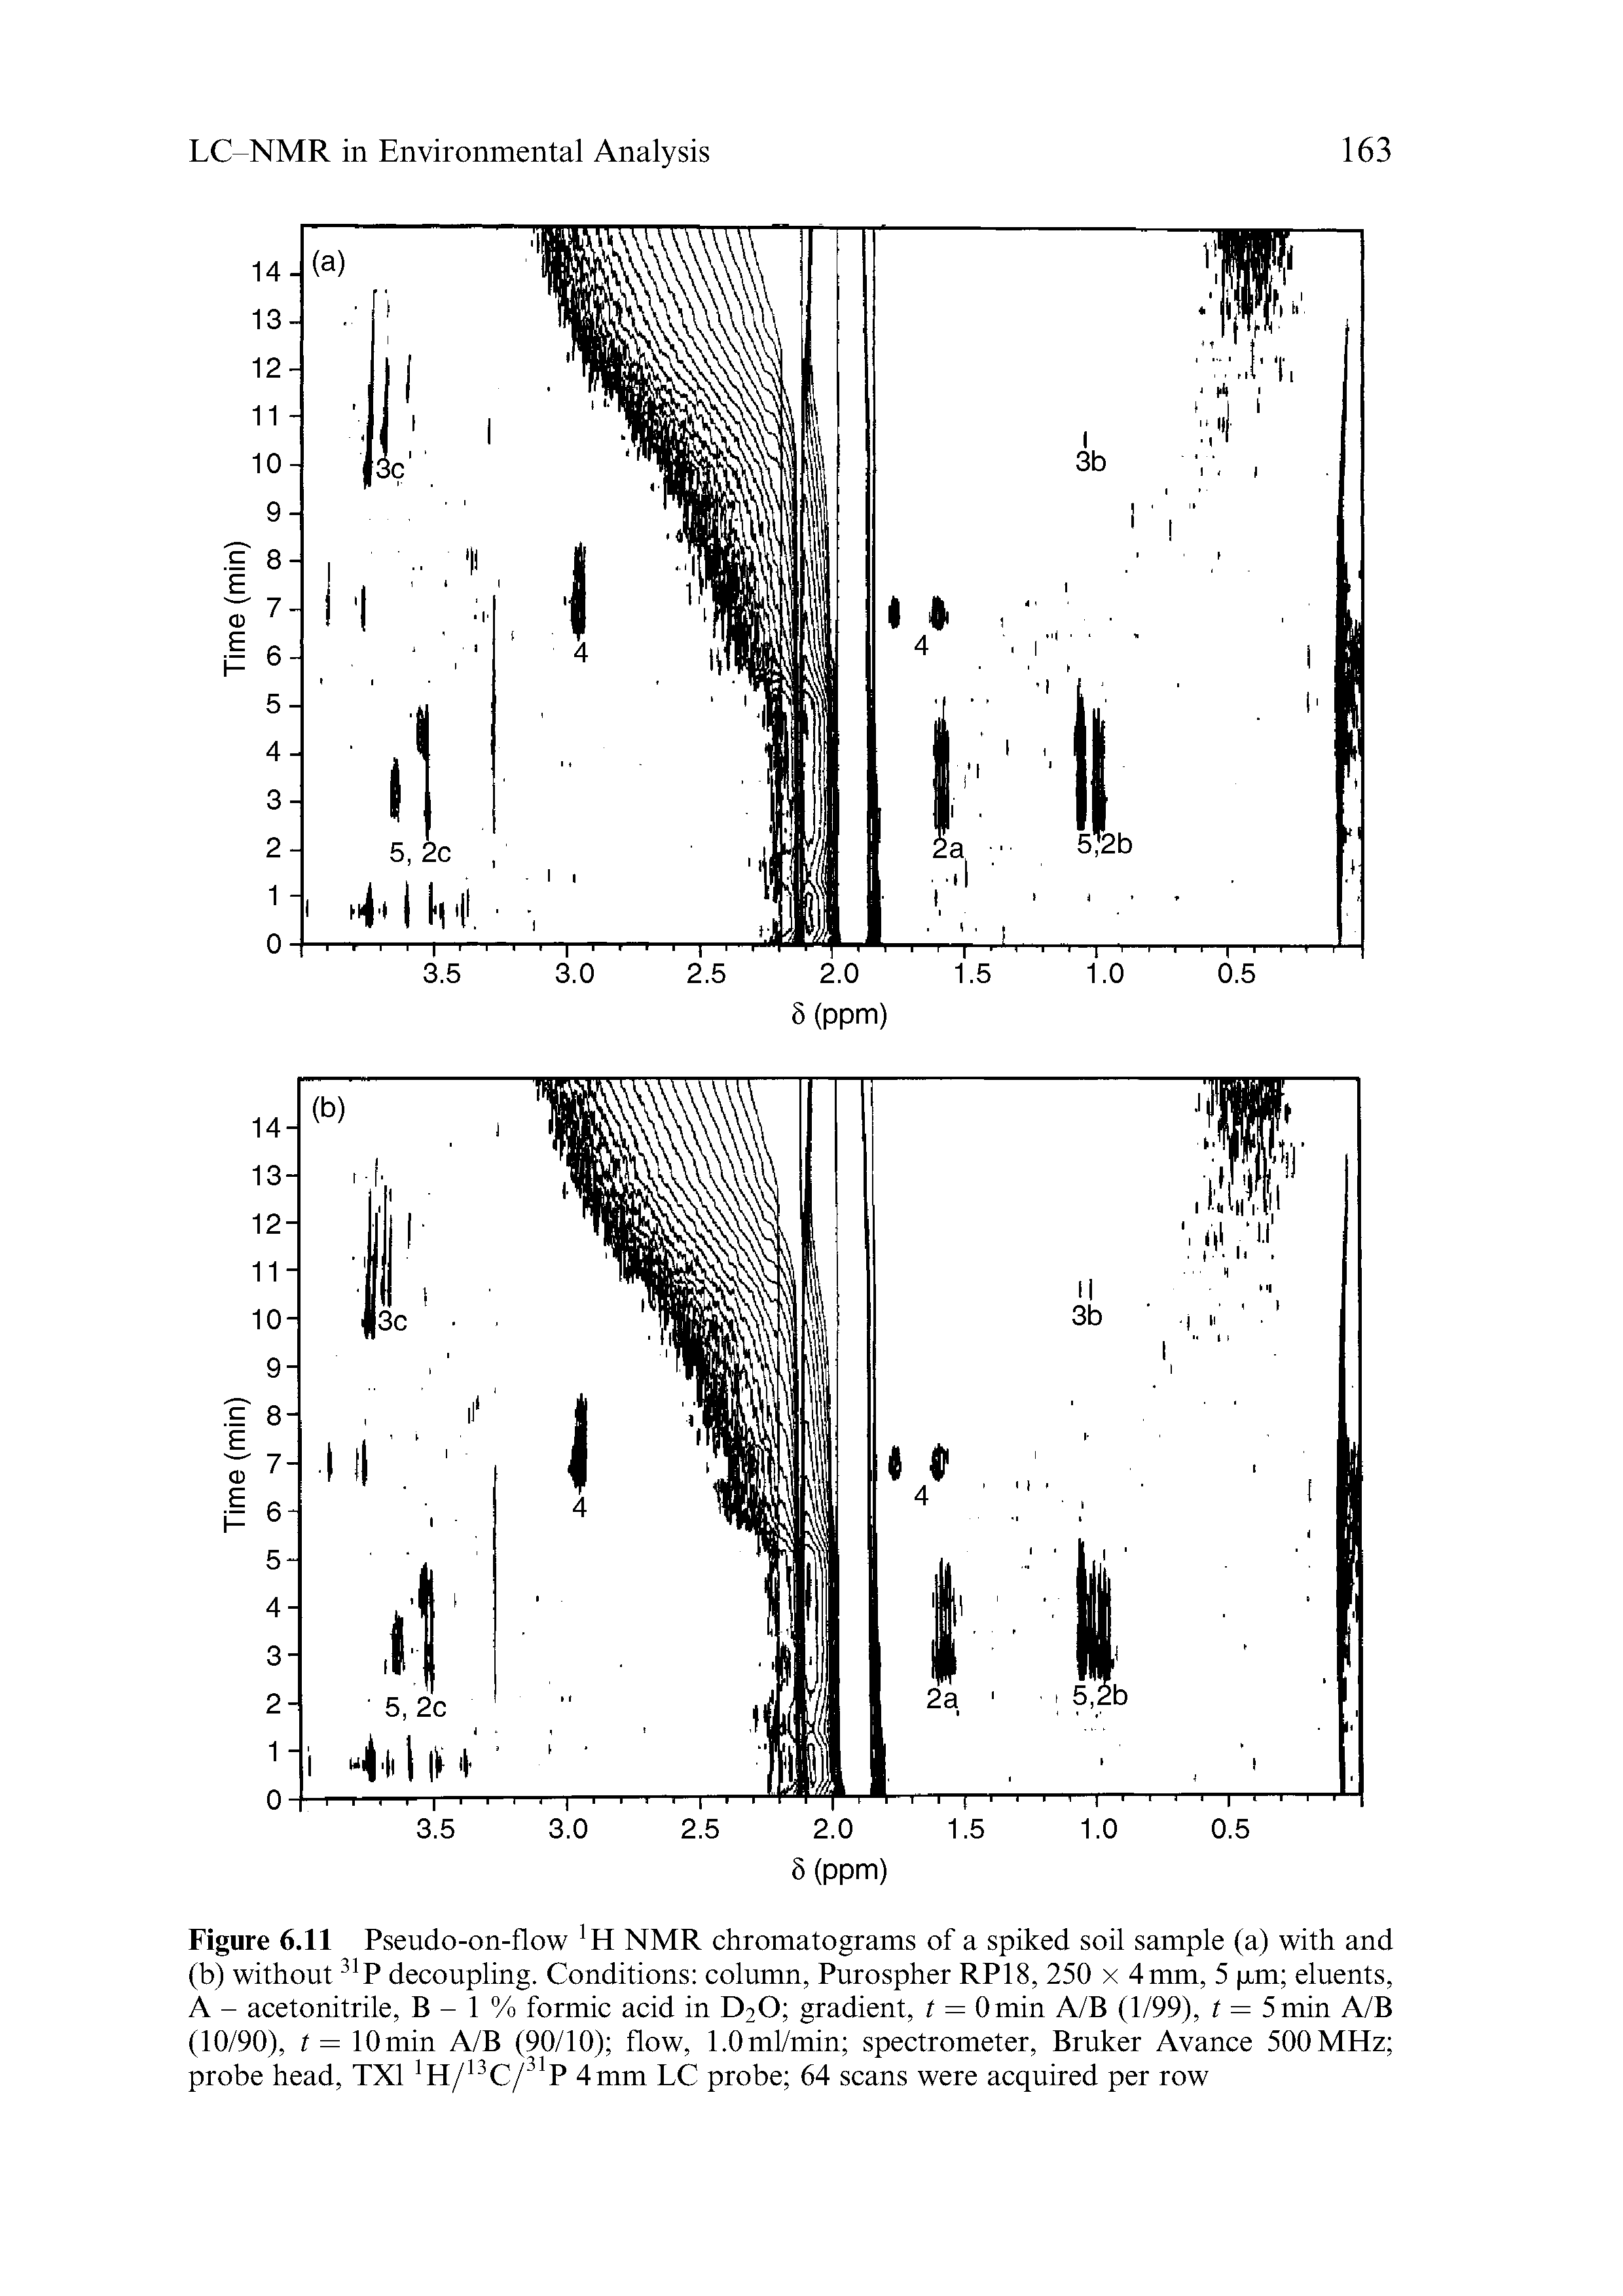 Figure 6.11 Pseudo-on-flow 1 H NMR chromatograms of a spiked soil sample (a) with and (b) without31P decoupling. Conditions column, Purospher RP18, 250 x 4 mm, 5 pm eluents, A - acetonitrile, B - 1 % formic acid in D20 gradient, t = Omin A/B (1/99), t = 5 min A/B (10/90), t = 10min A/B (90/10) flow, l.Oml/min spectrometer, Bruker Avance 500MHz probe head, TX1 H/ C/31 4 mm LC probe 64 scans were acquired per row...